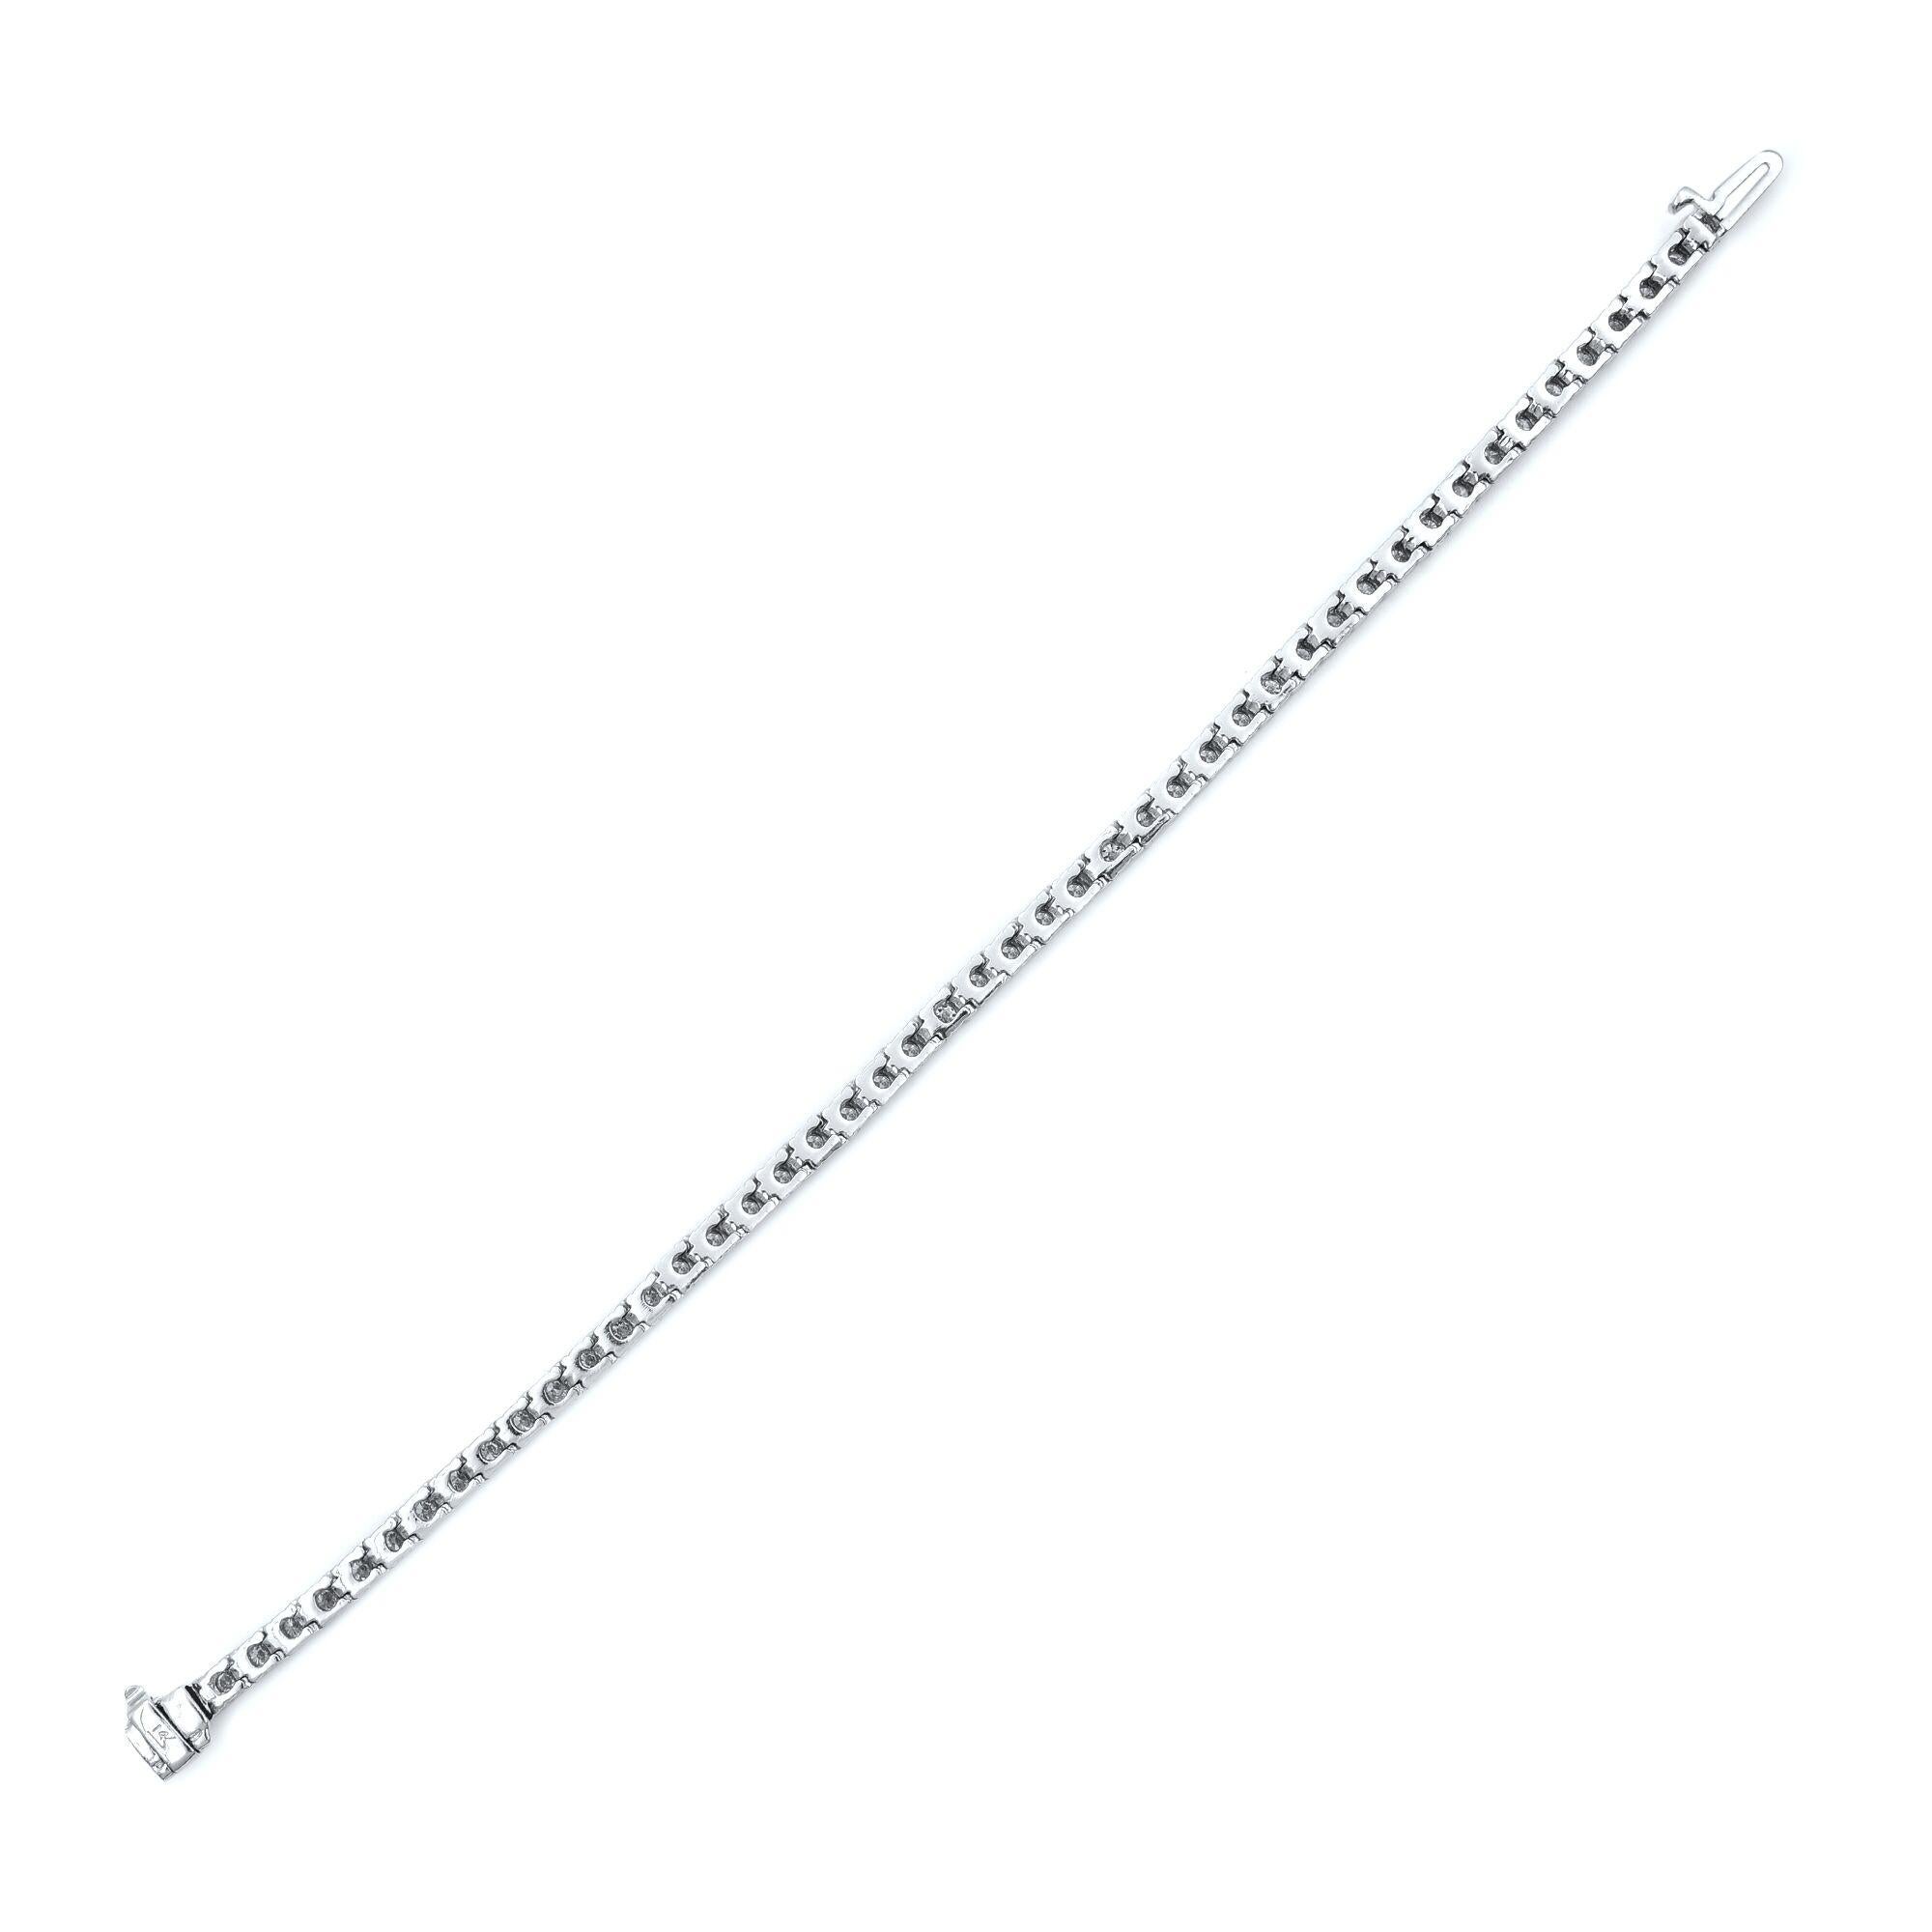 This classic and elegant tennis bracelet features 4.50 carats of brilliant round cut diamonds on a 14K white gold flexible setting. Clasp: Box catch with hidden safety. This tennis bracelet is a timeless piece that holds a place in the collection of